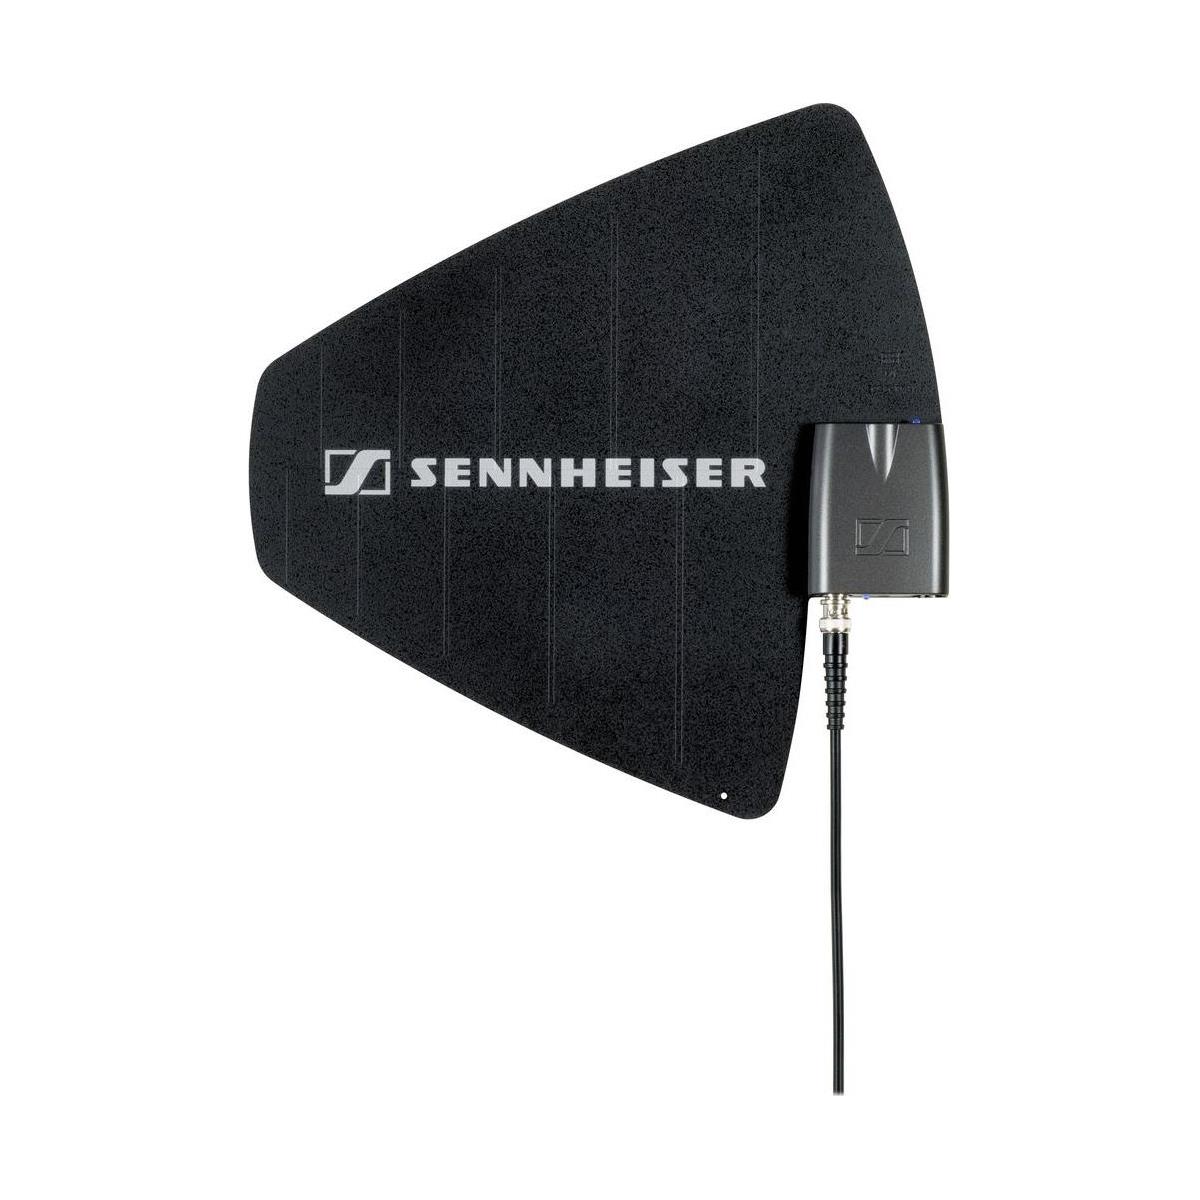 Image of Sennheiser AD3700 Active Directional Antenna with AB3700 Booster